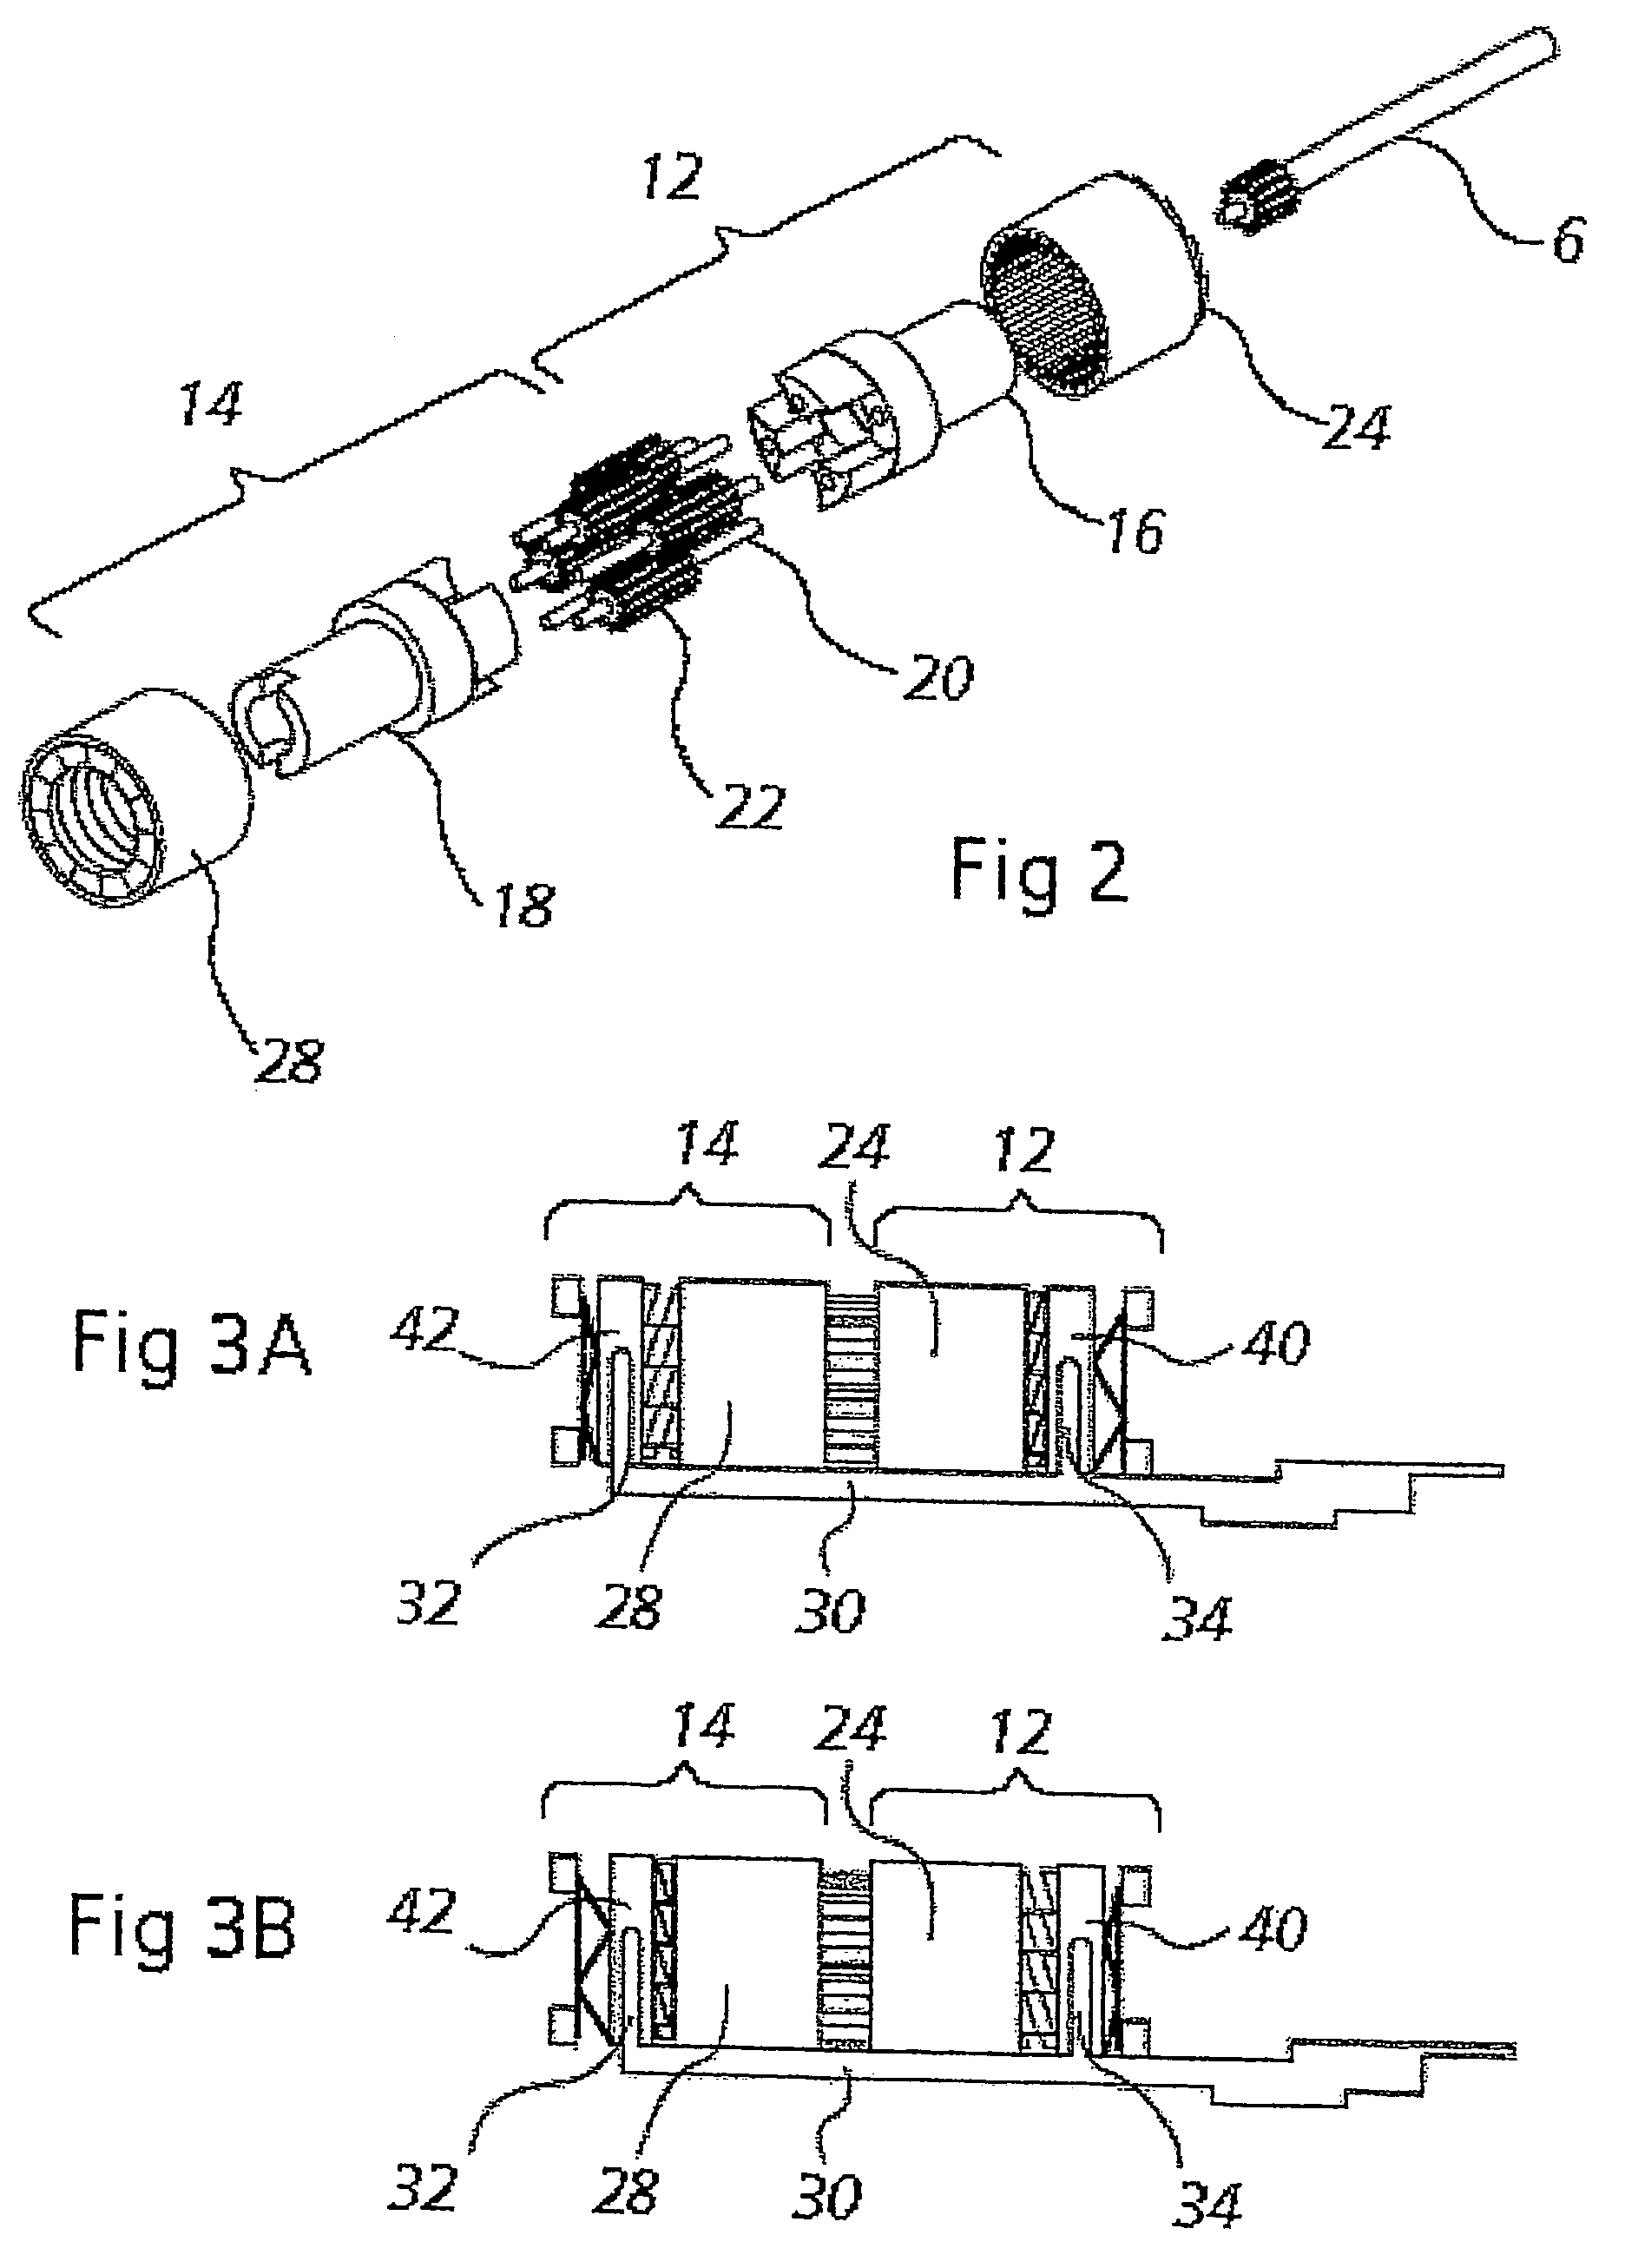 Device for controlling a venetian blind